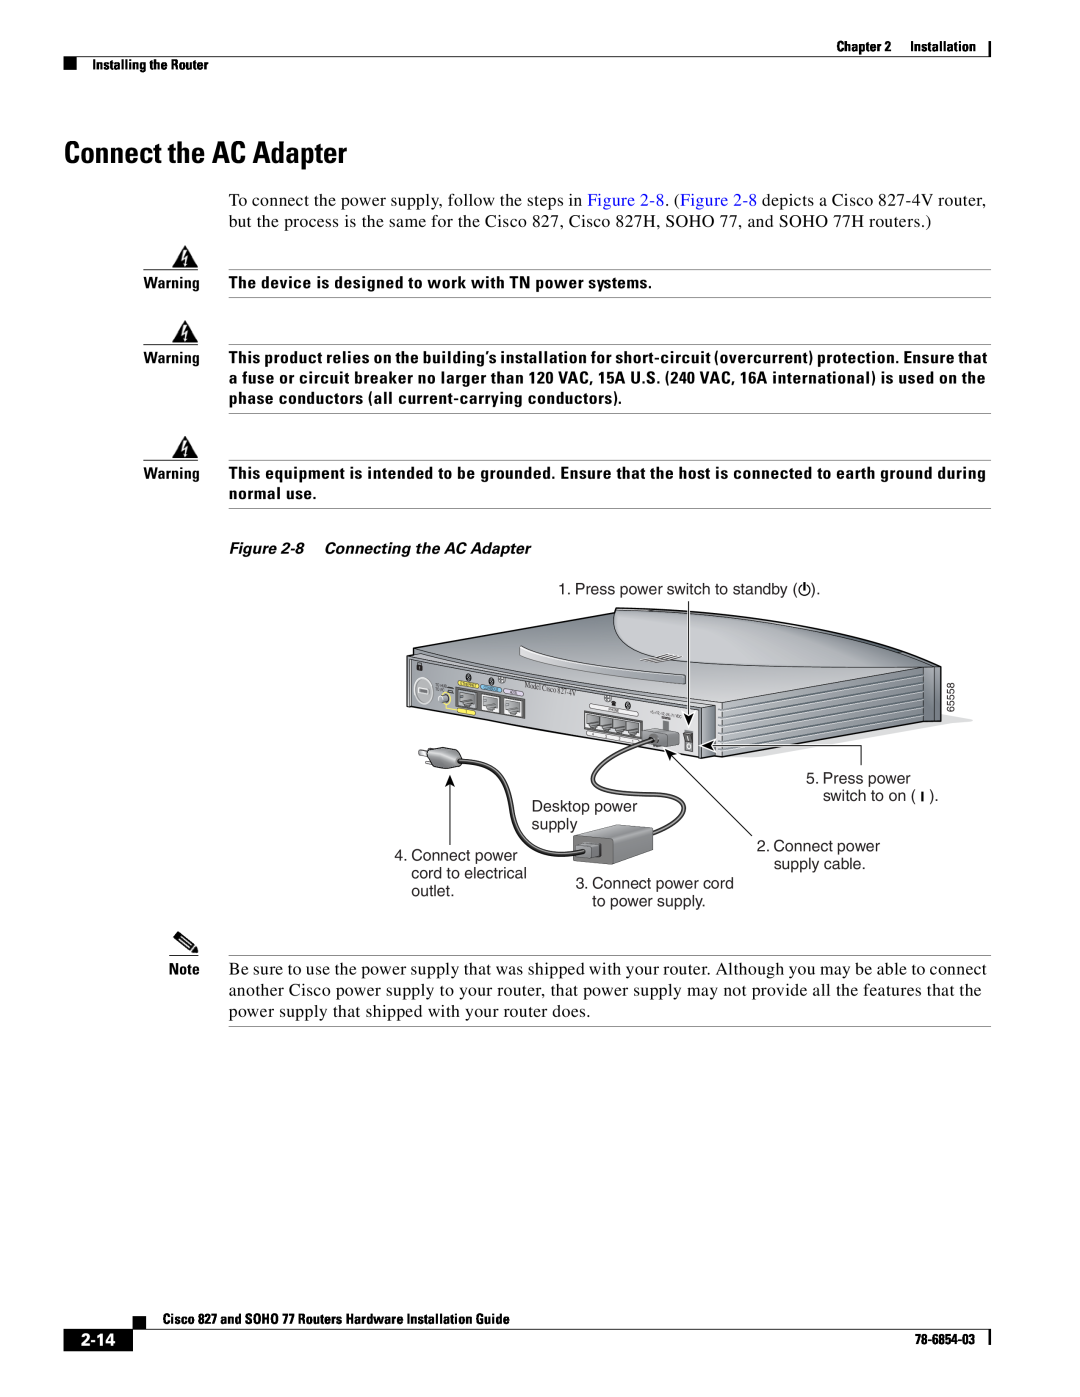 Cisco Systems SOHO 77 manual Connect the AC Adapter, 2-14 